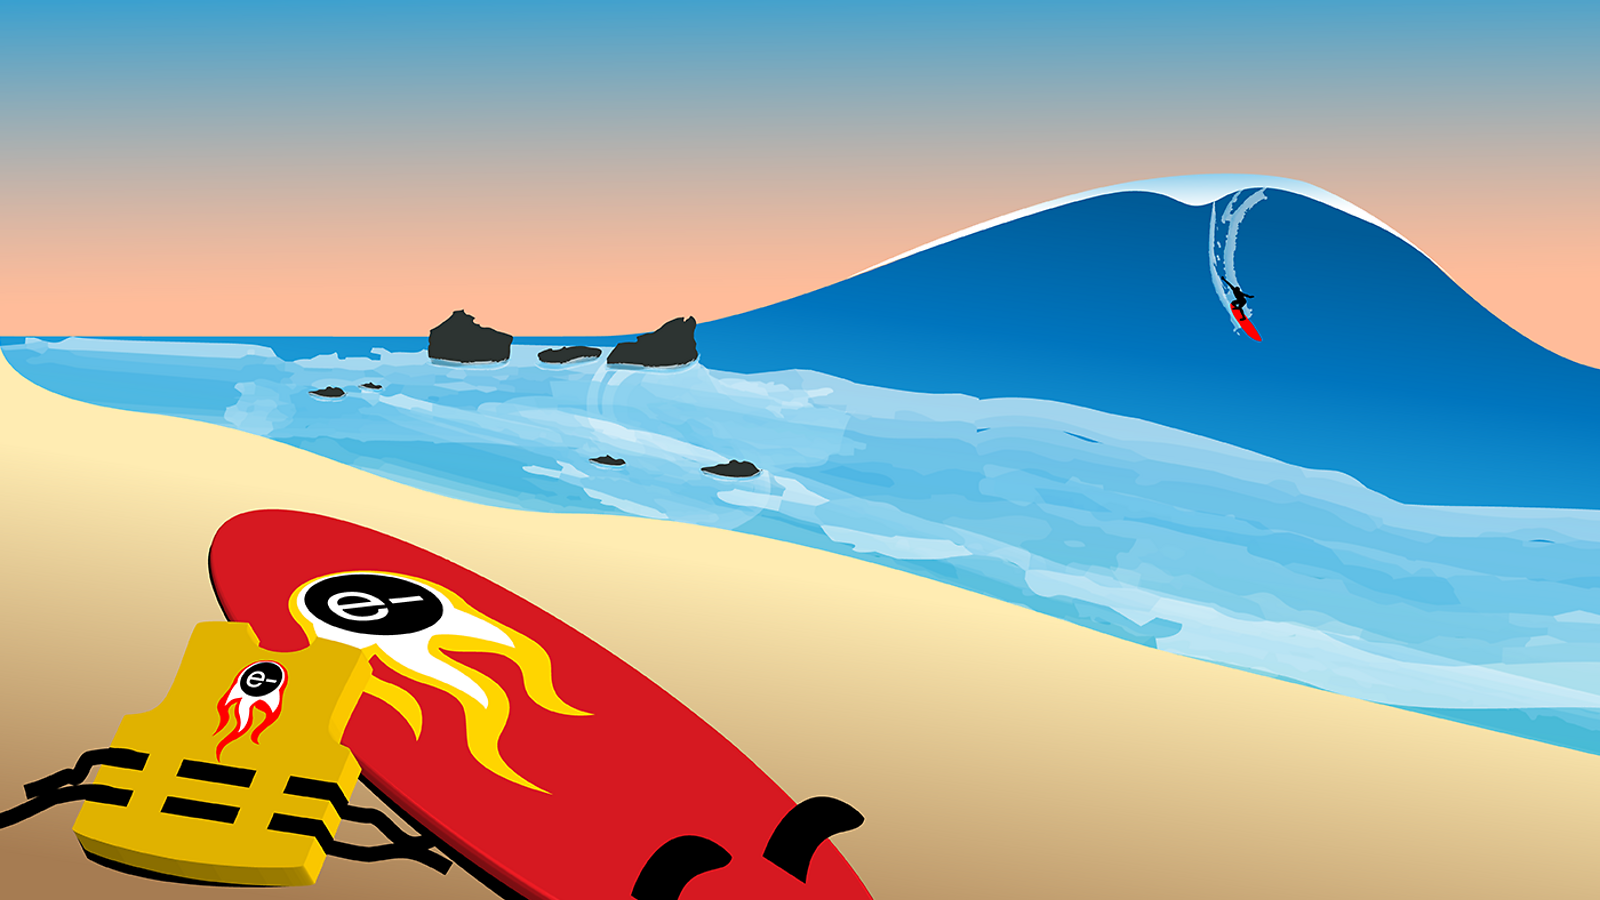 Illustration of beach with surf board, life vest, and person surfing on large blue wave in background